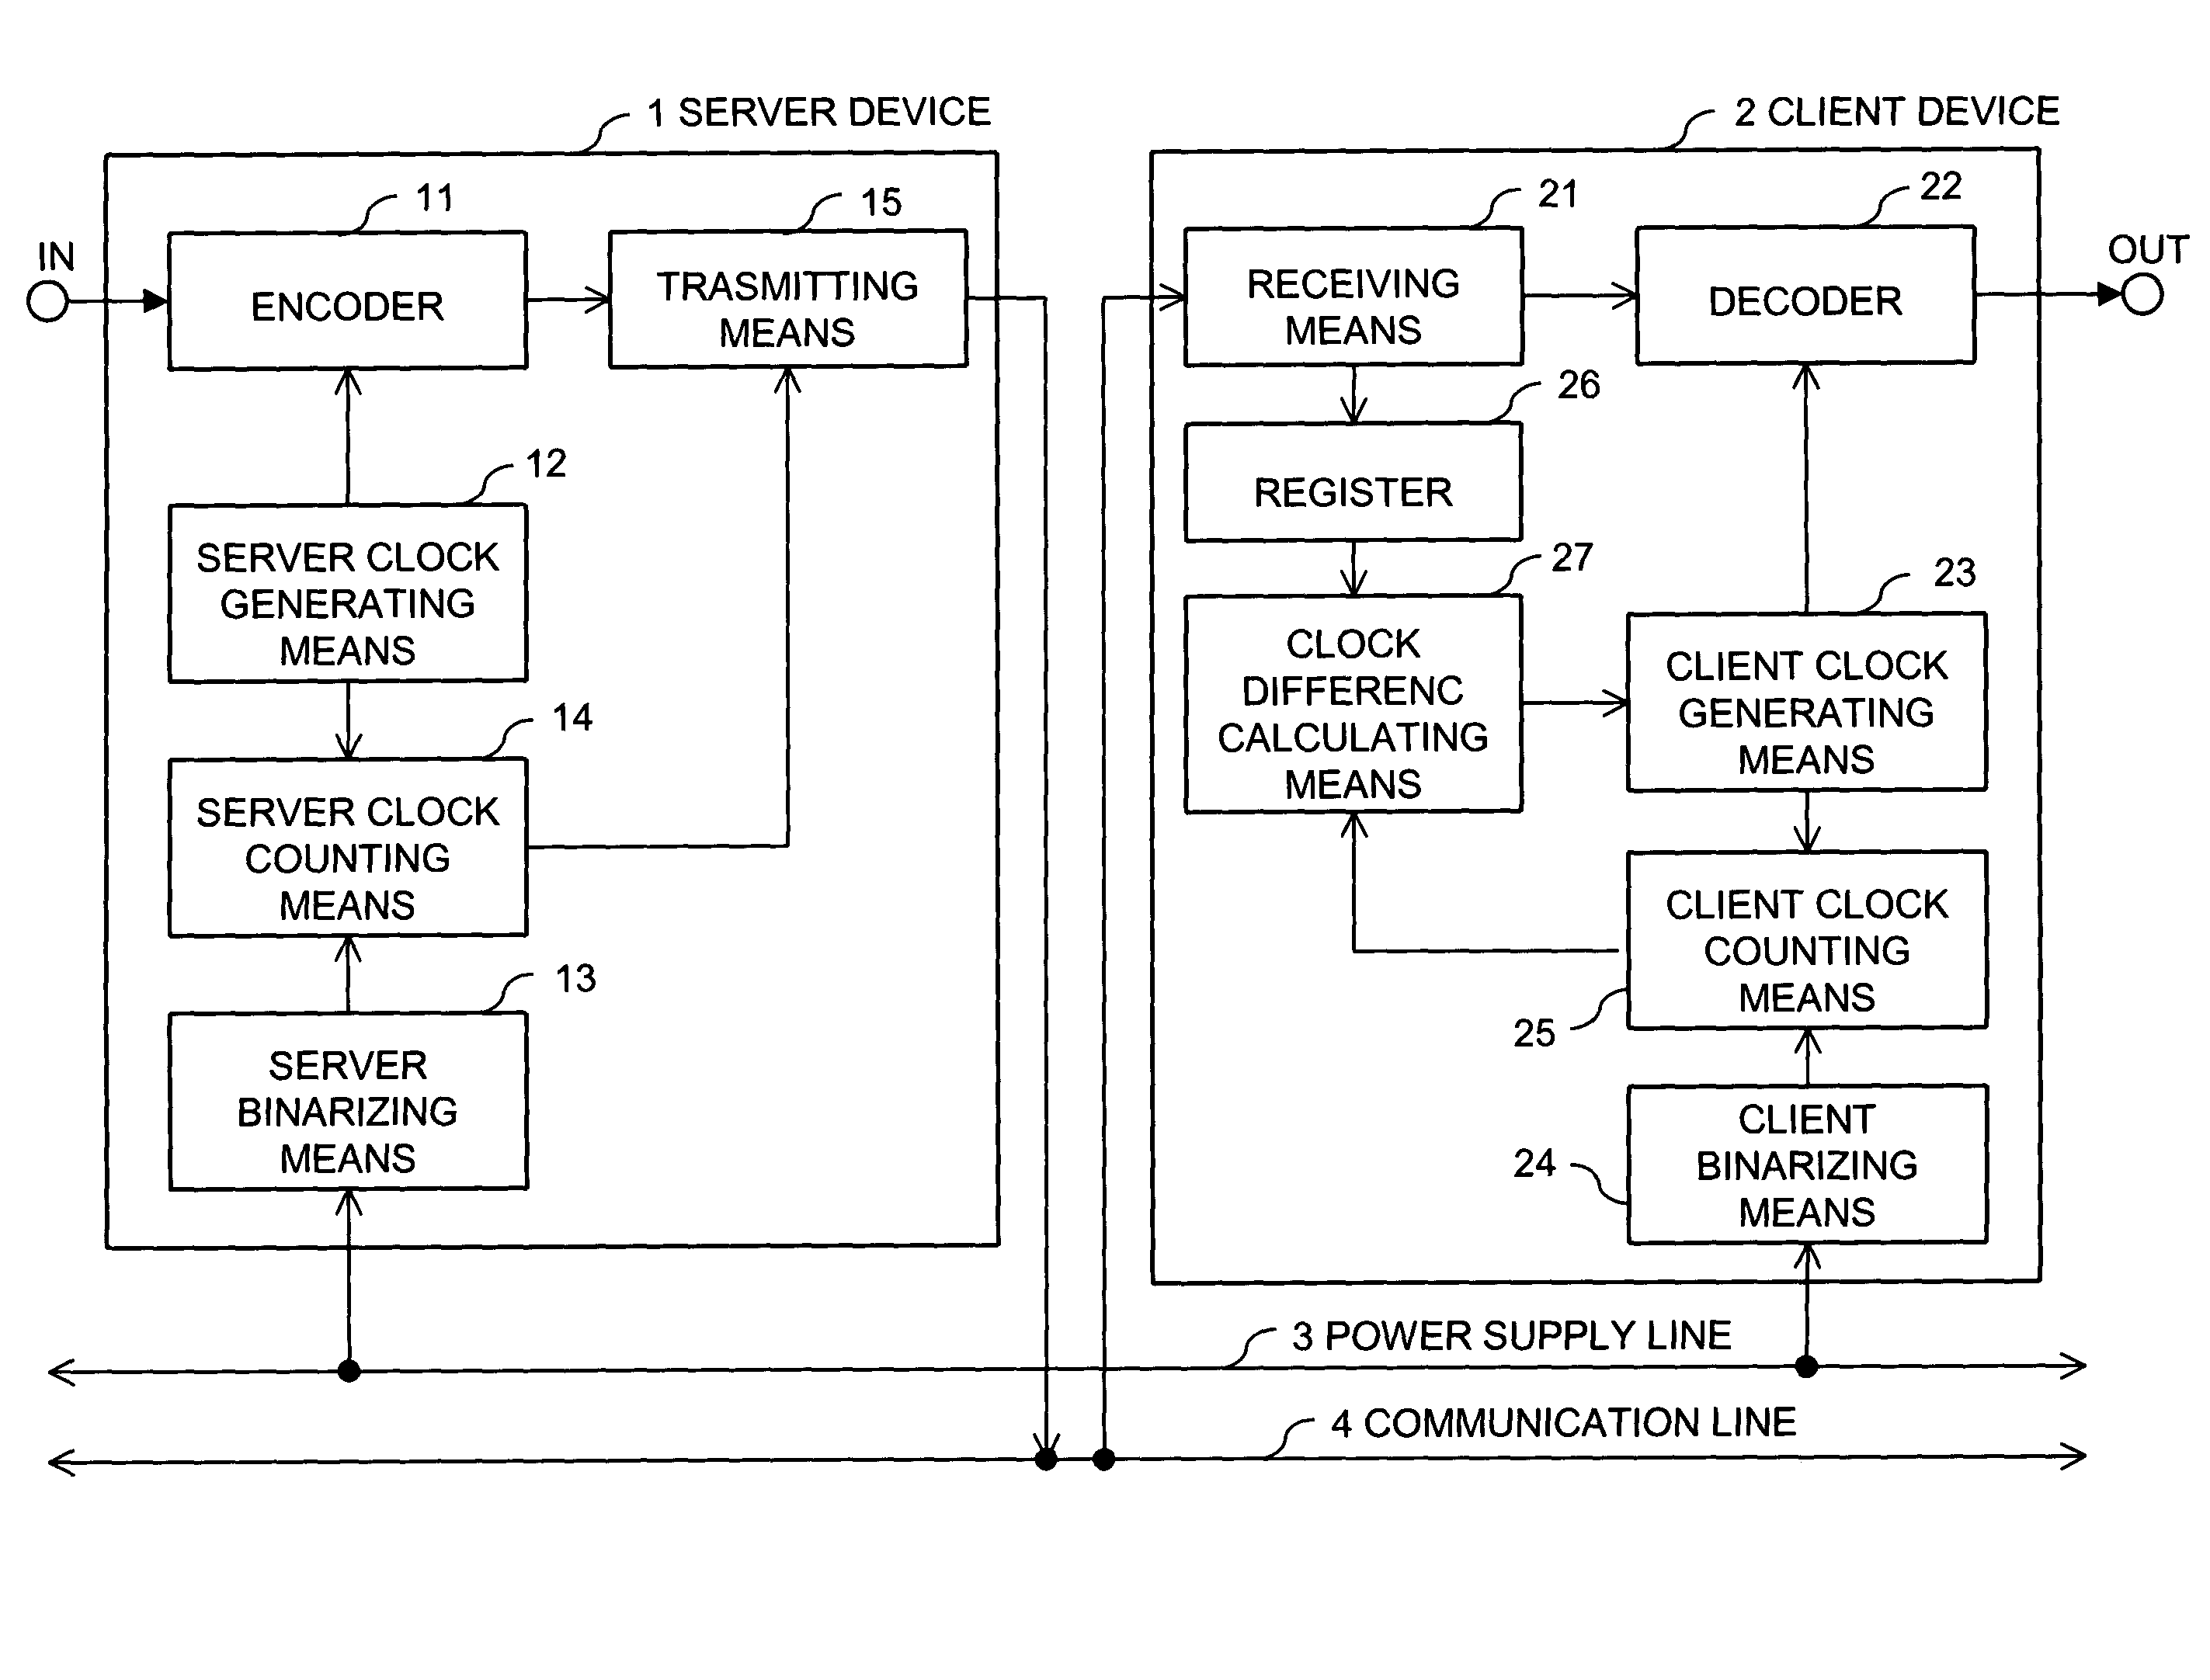 Synchronizing clock signals of server and client devices in a network system based on power source synchronous pulse signal